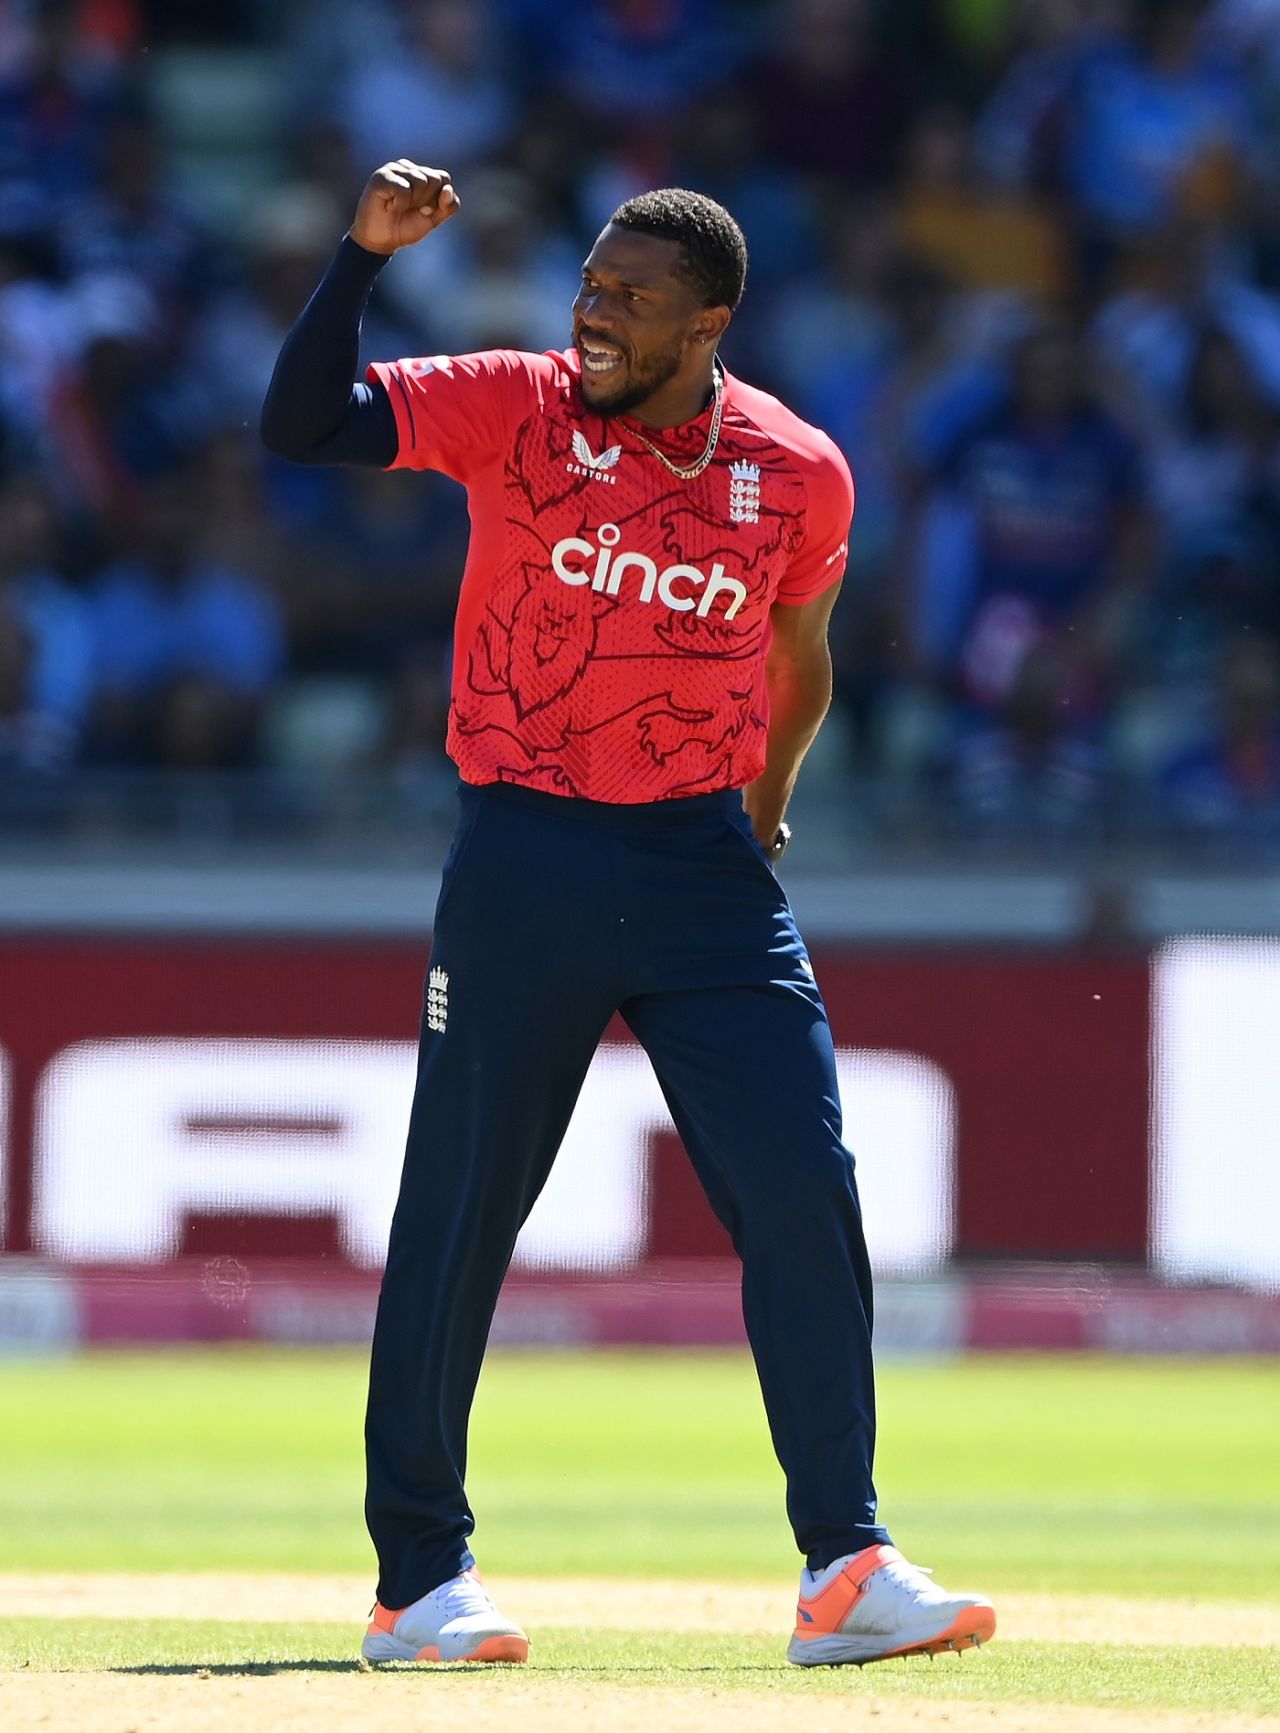 Chris Jordan picked up four wickets to dent India, England vs India, 2nd men's T20I, Birmingham, July 9, 2022